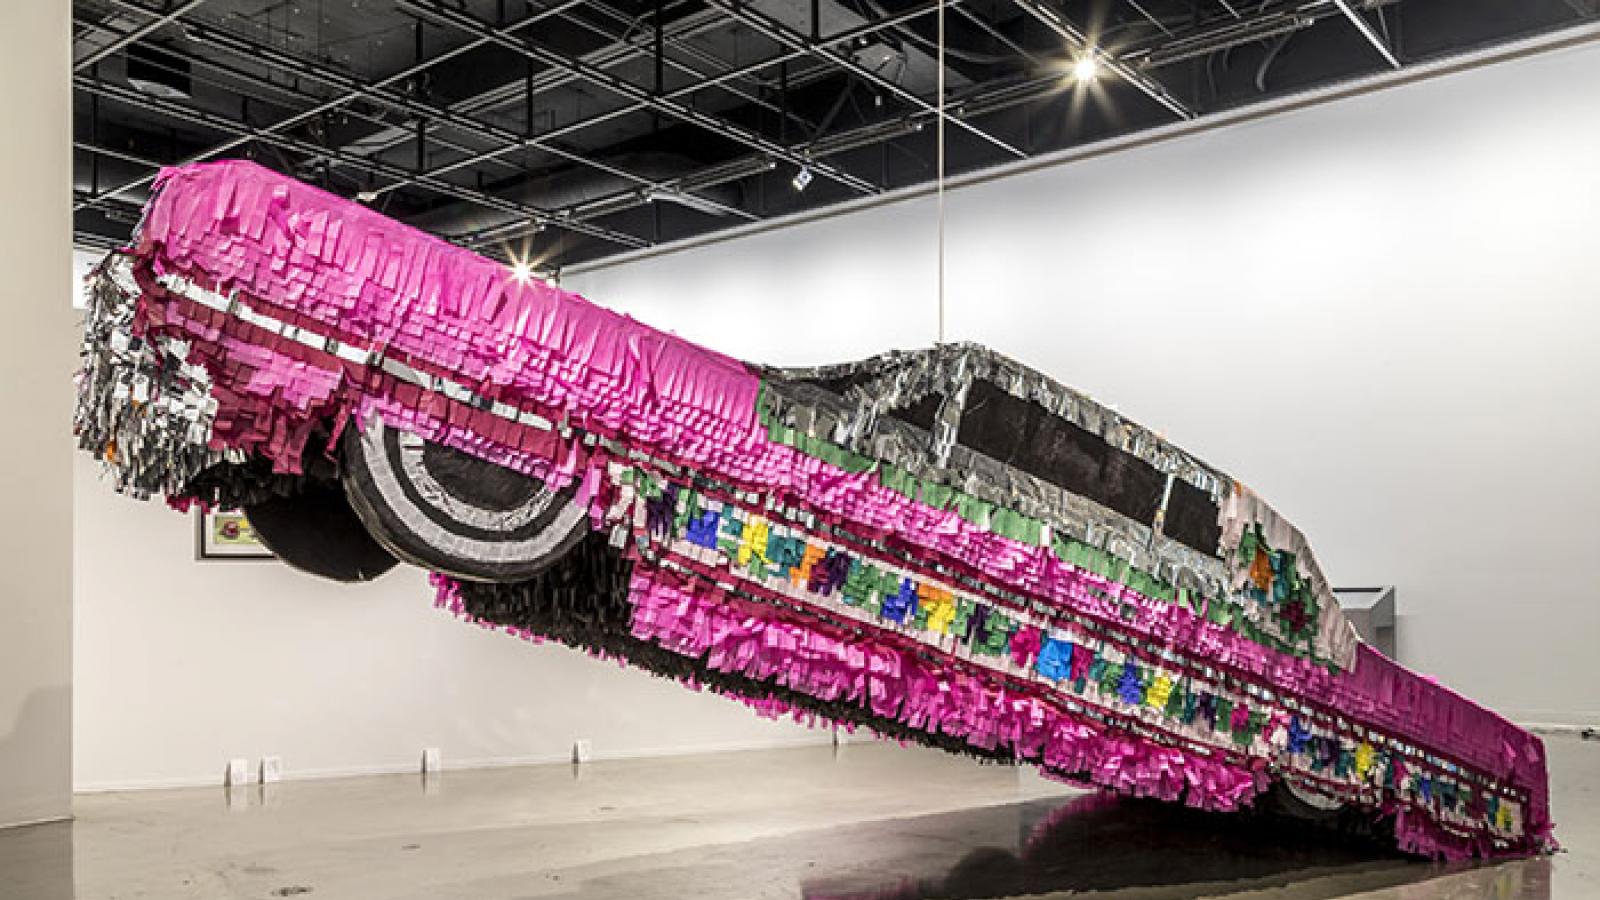 Life-size lowrider car piñata hanging in a museum